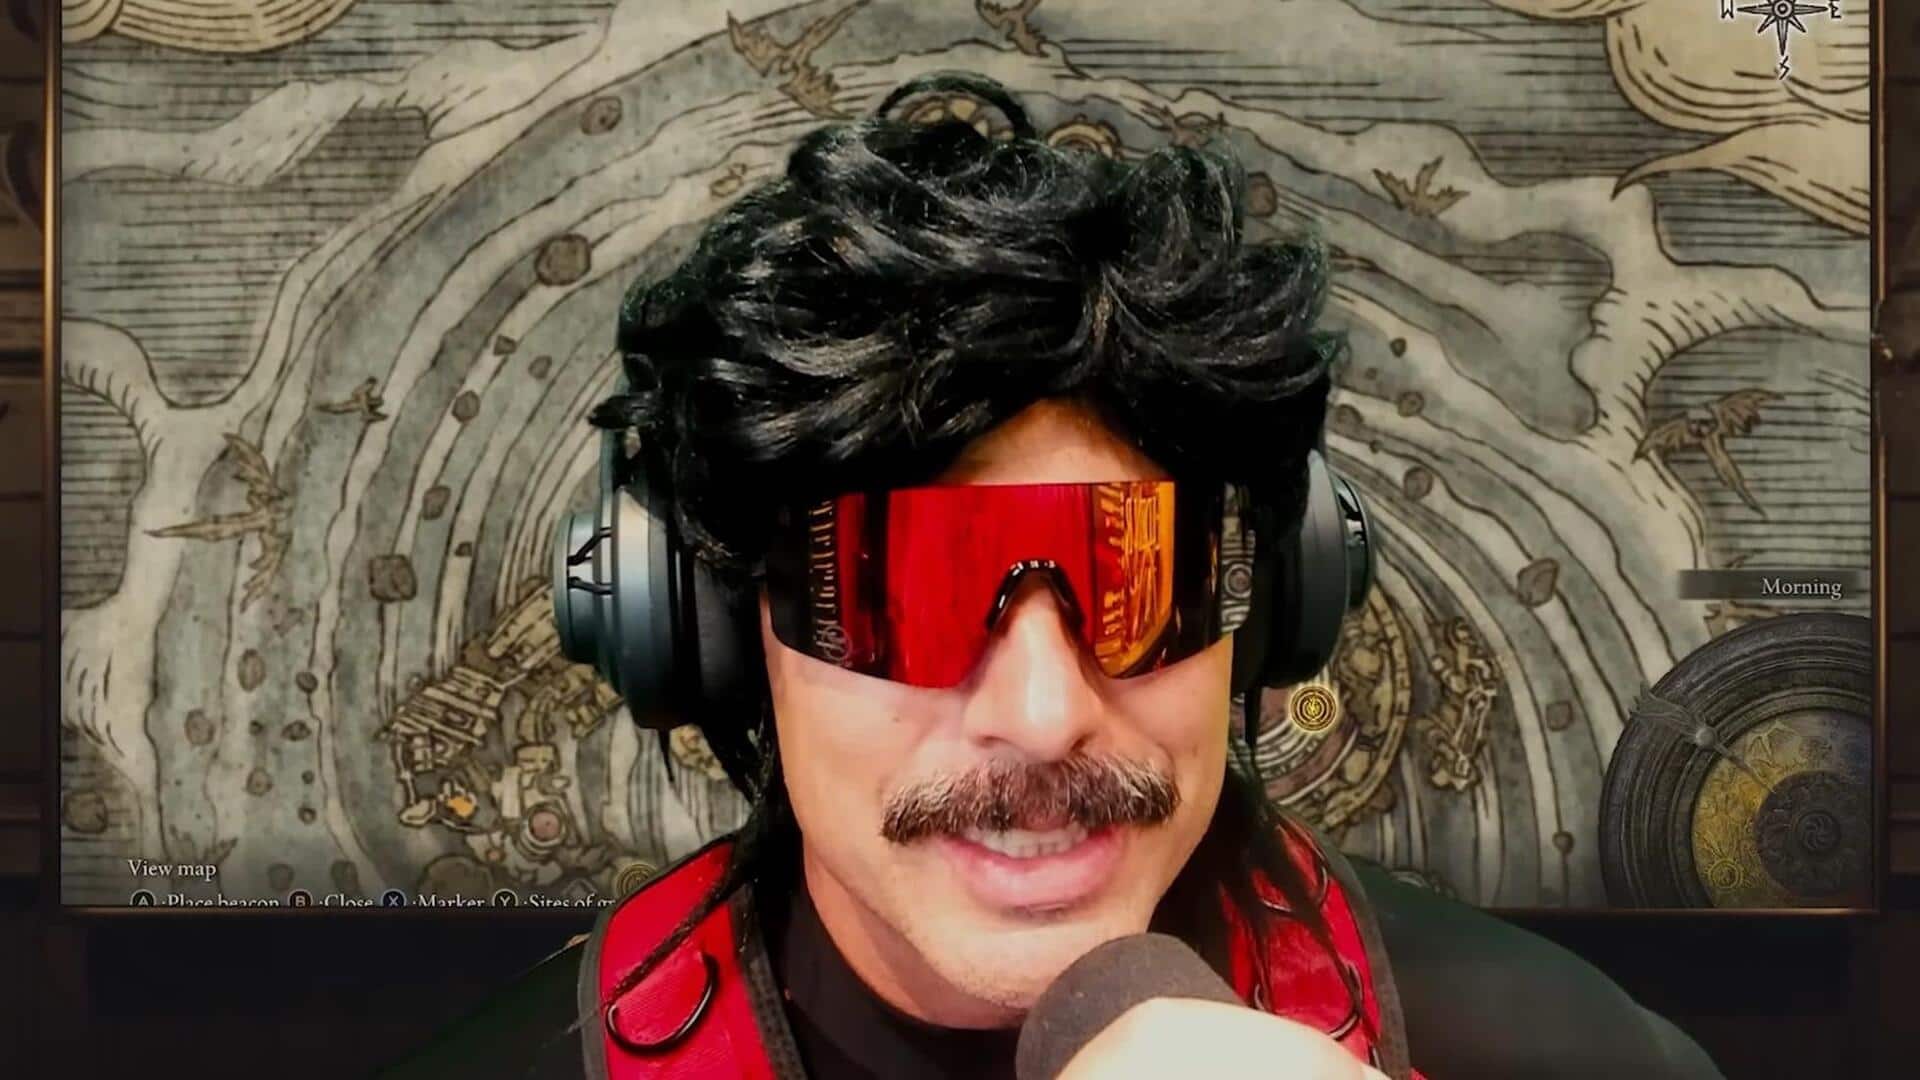 Twitch employees claim Dr Disrespect's ban related to messaging minor